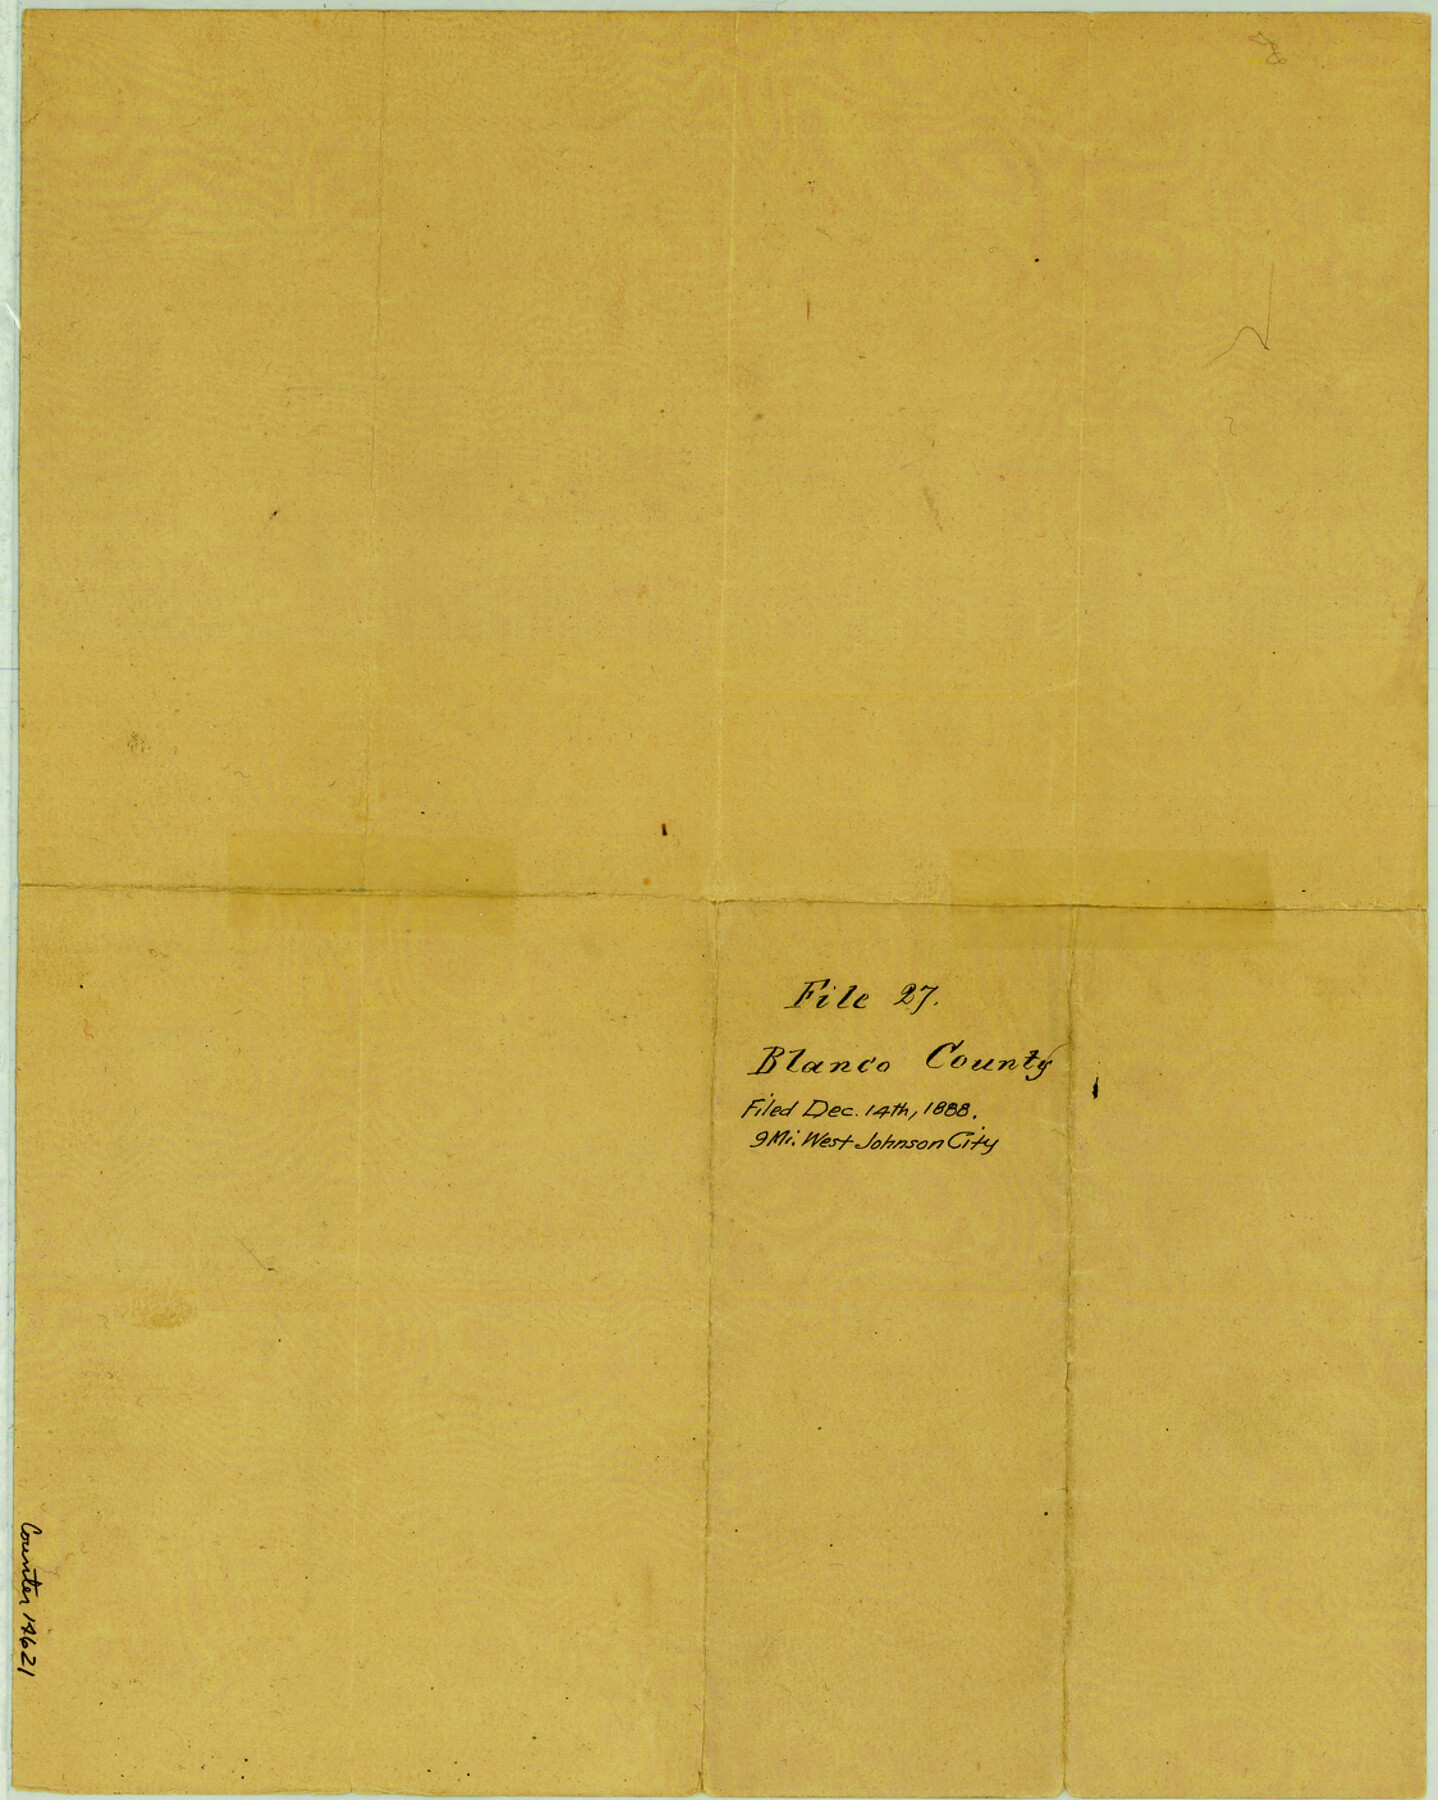 14621, Blanco County Sketch File 27, General Map Collection